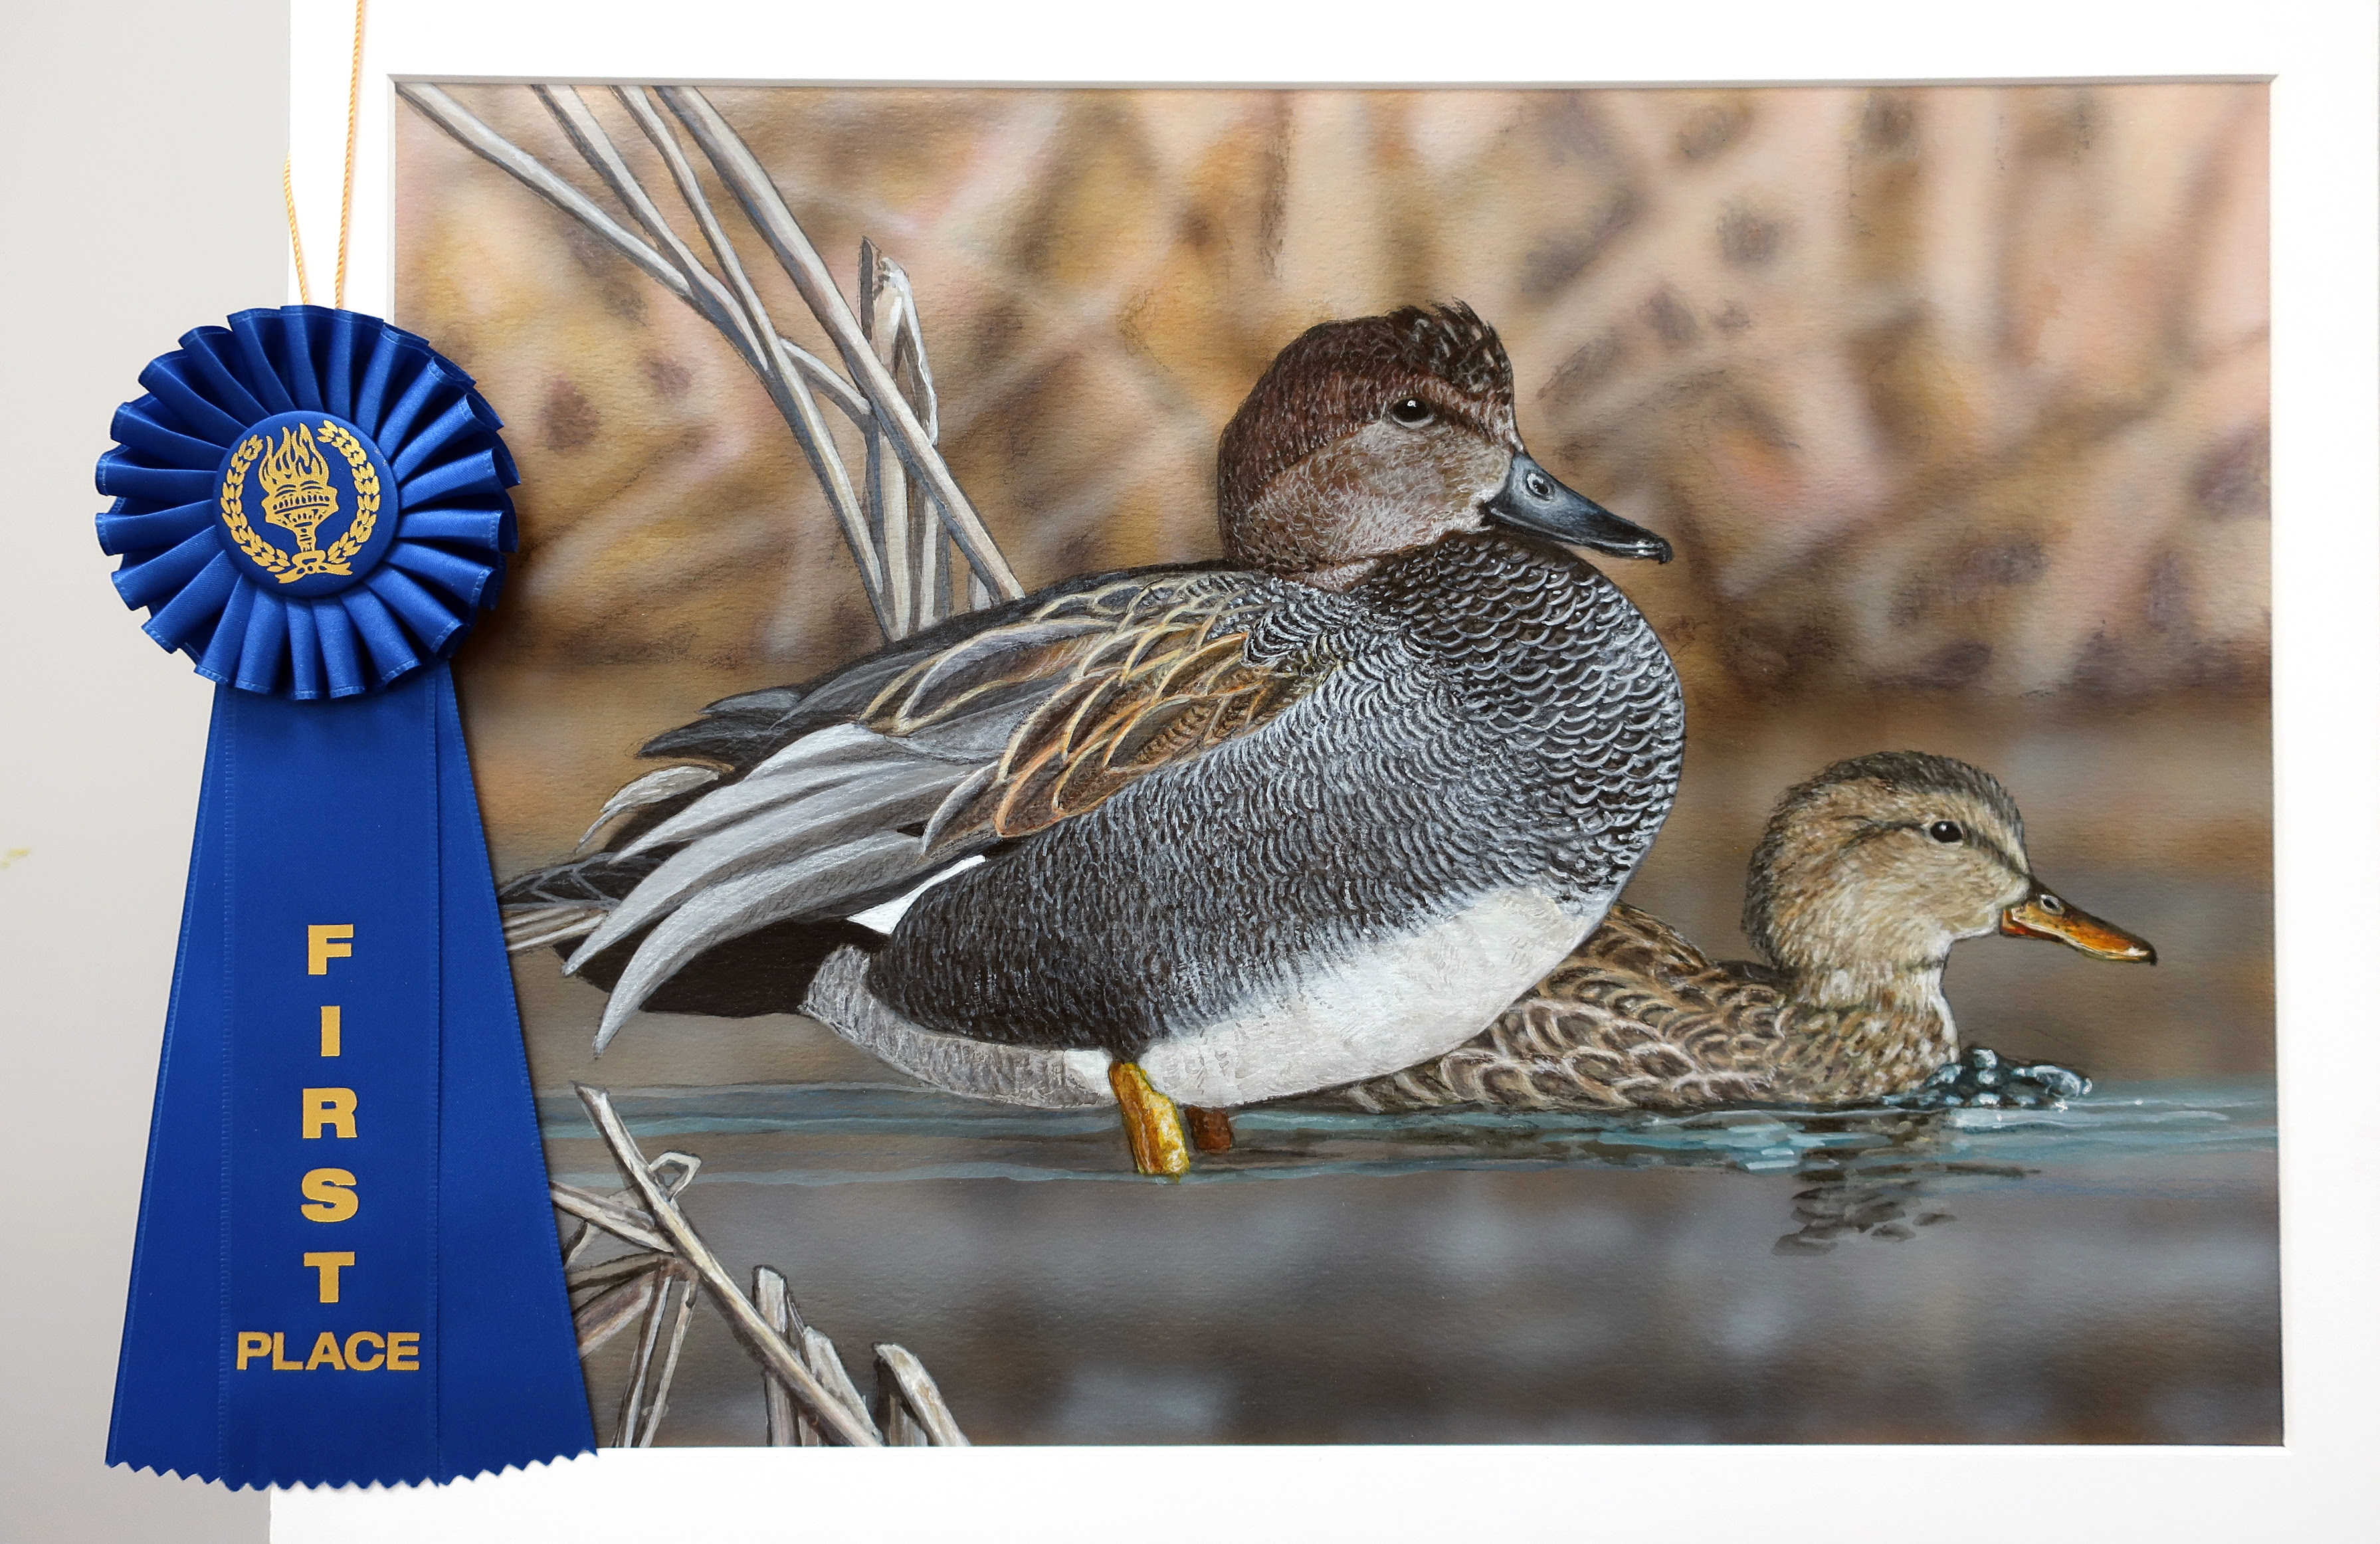 1st place duck stamp of two gadwalls in water with reeds